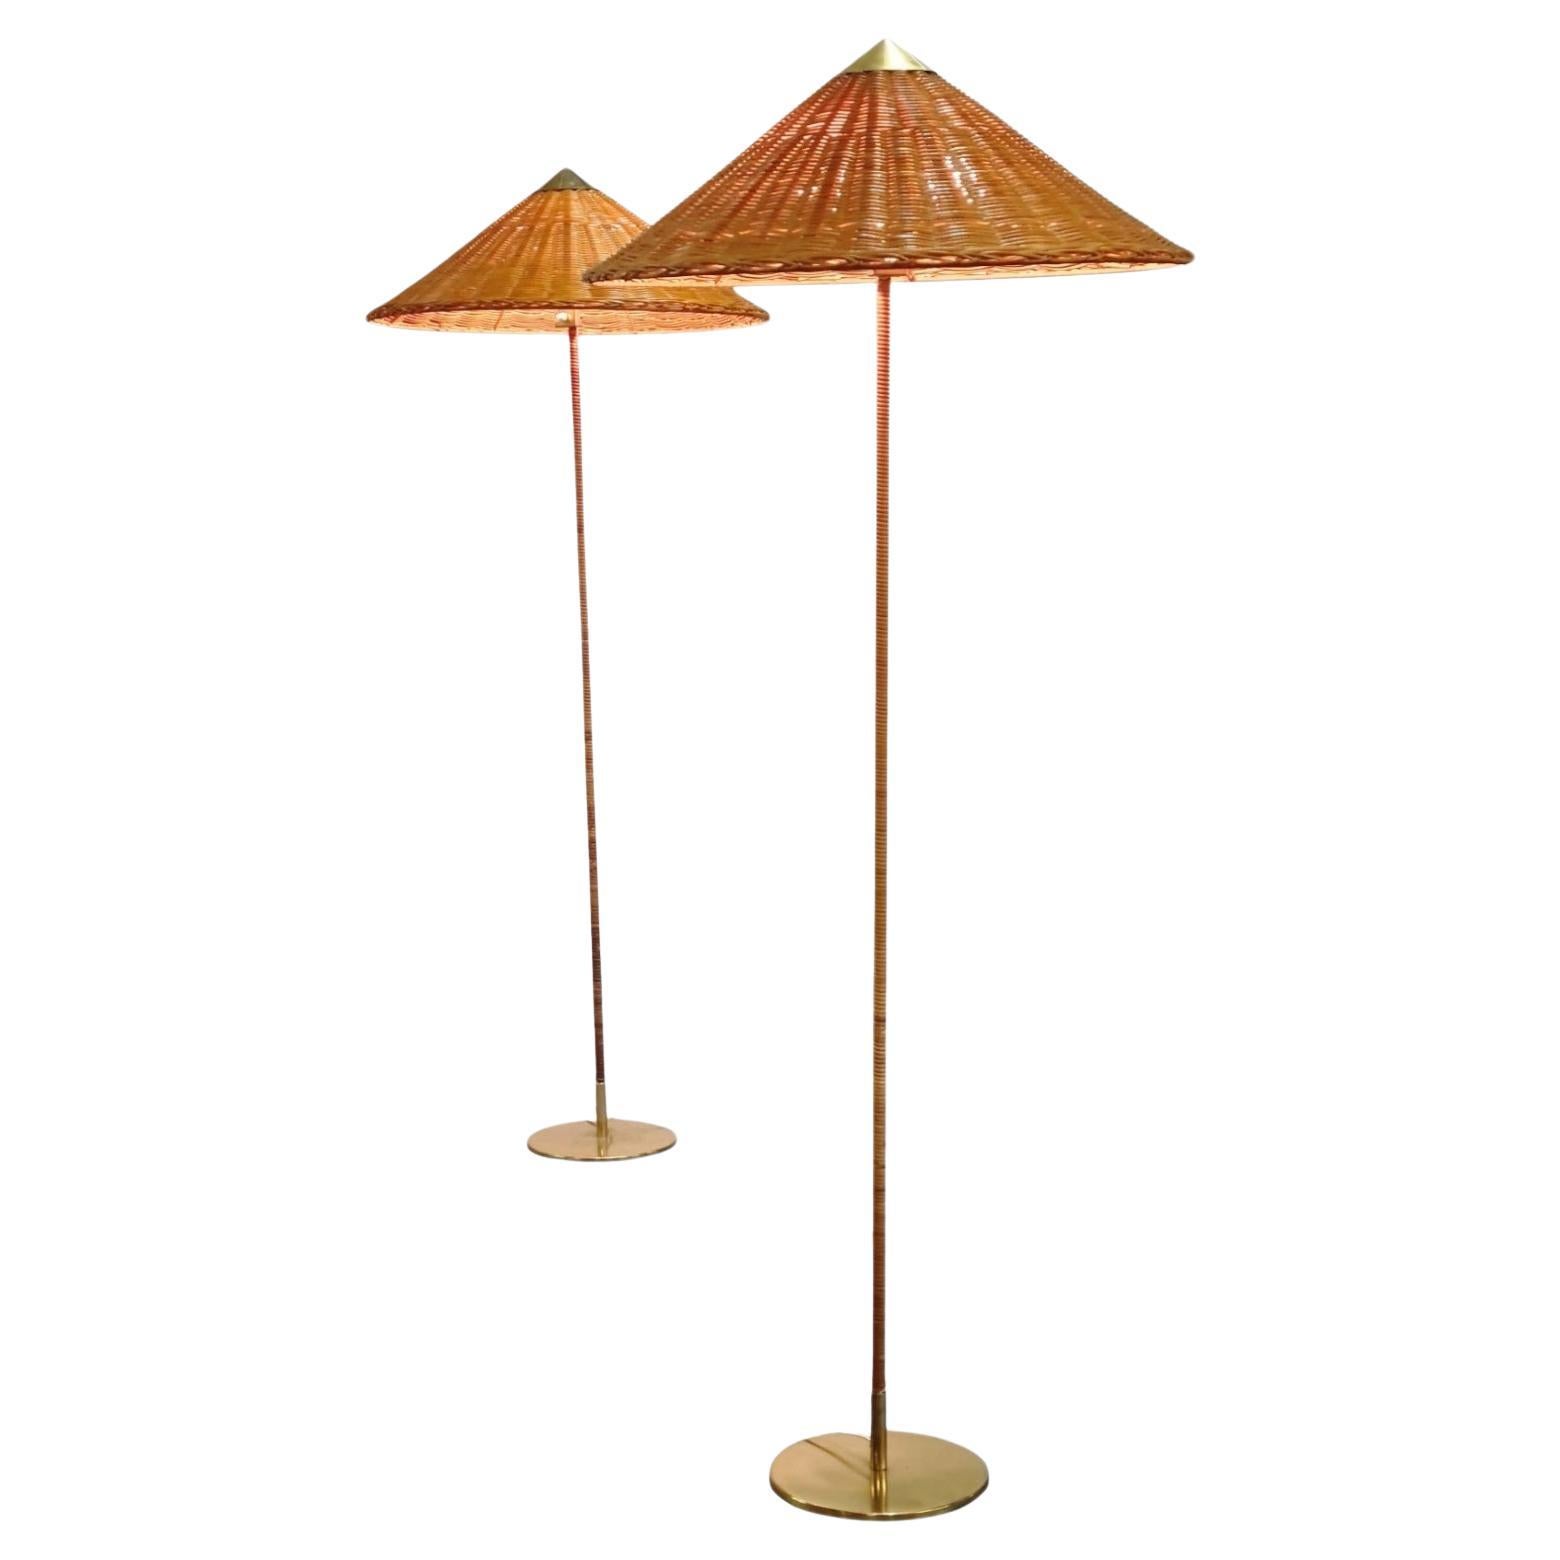 Pair of Paavo Tynell Floor Lamps Model 9602 "Chinese Hat" , Idman 1950s